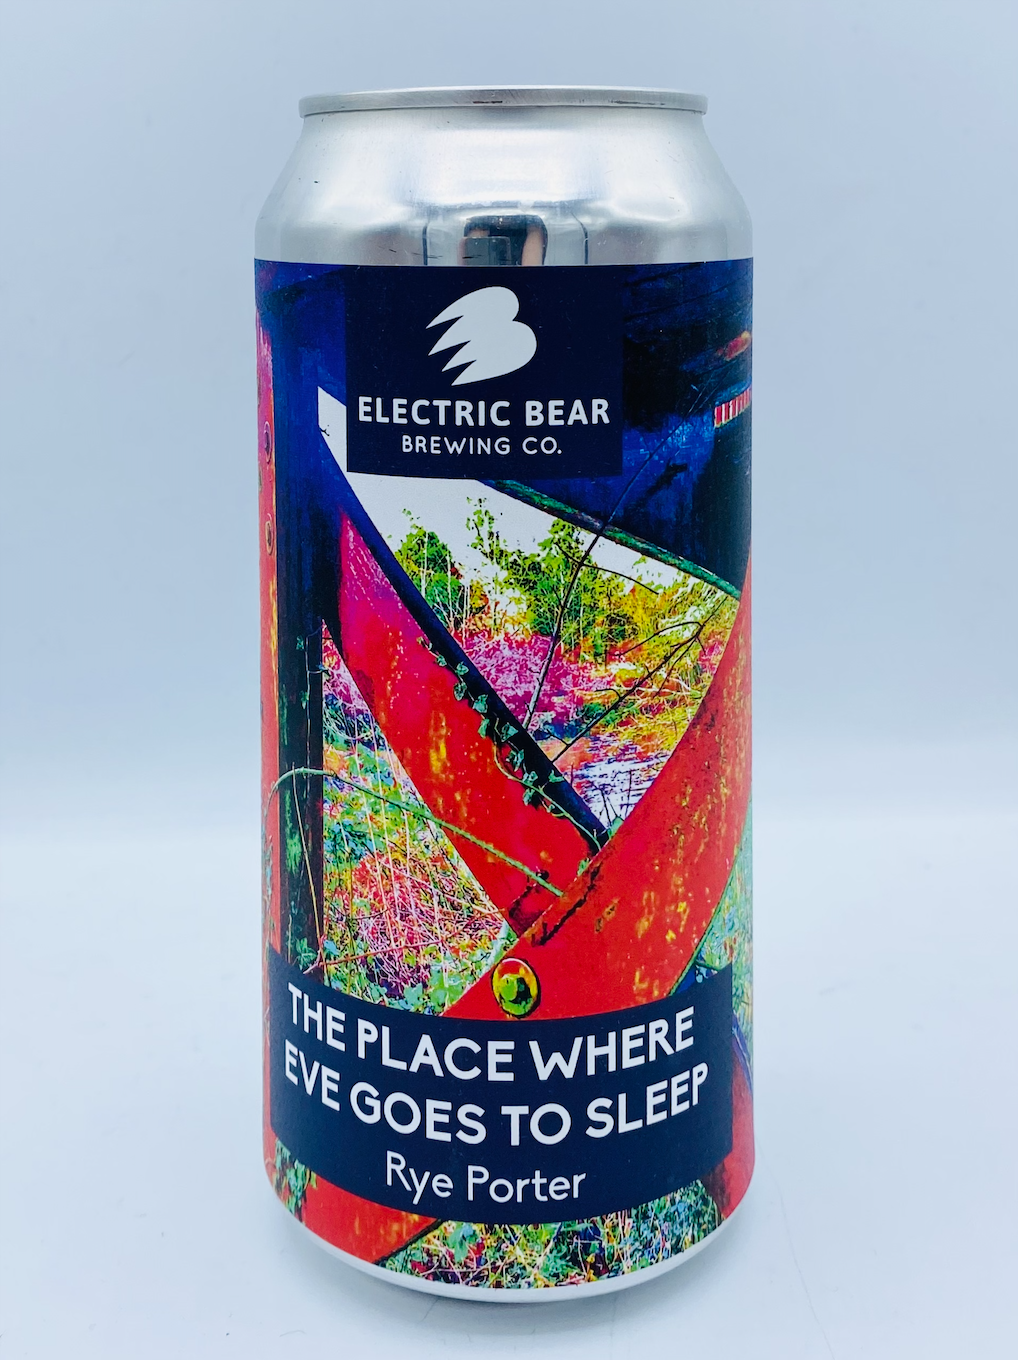 Electric Bear - The Place Where Eve Goes To Sleep 4.8%